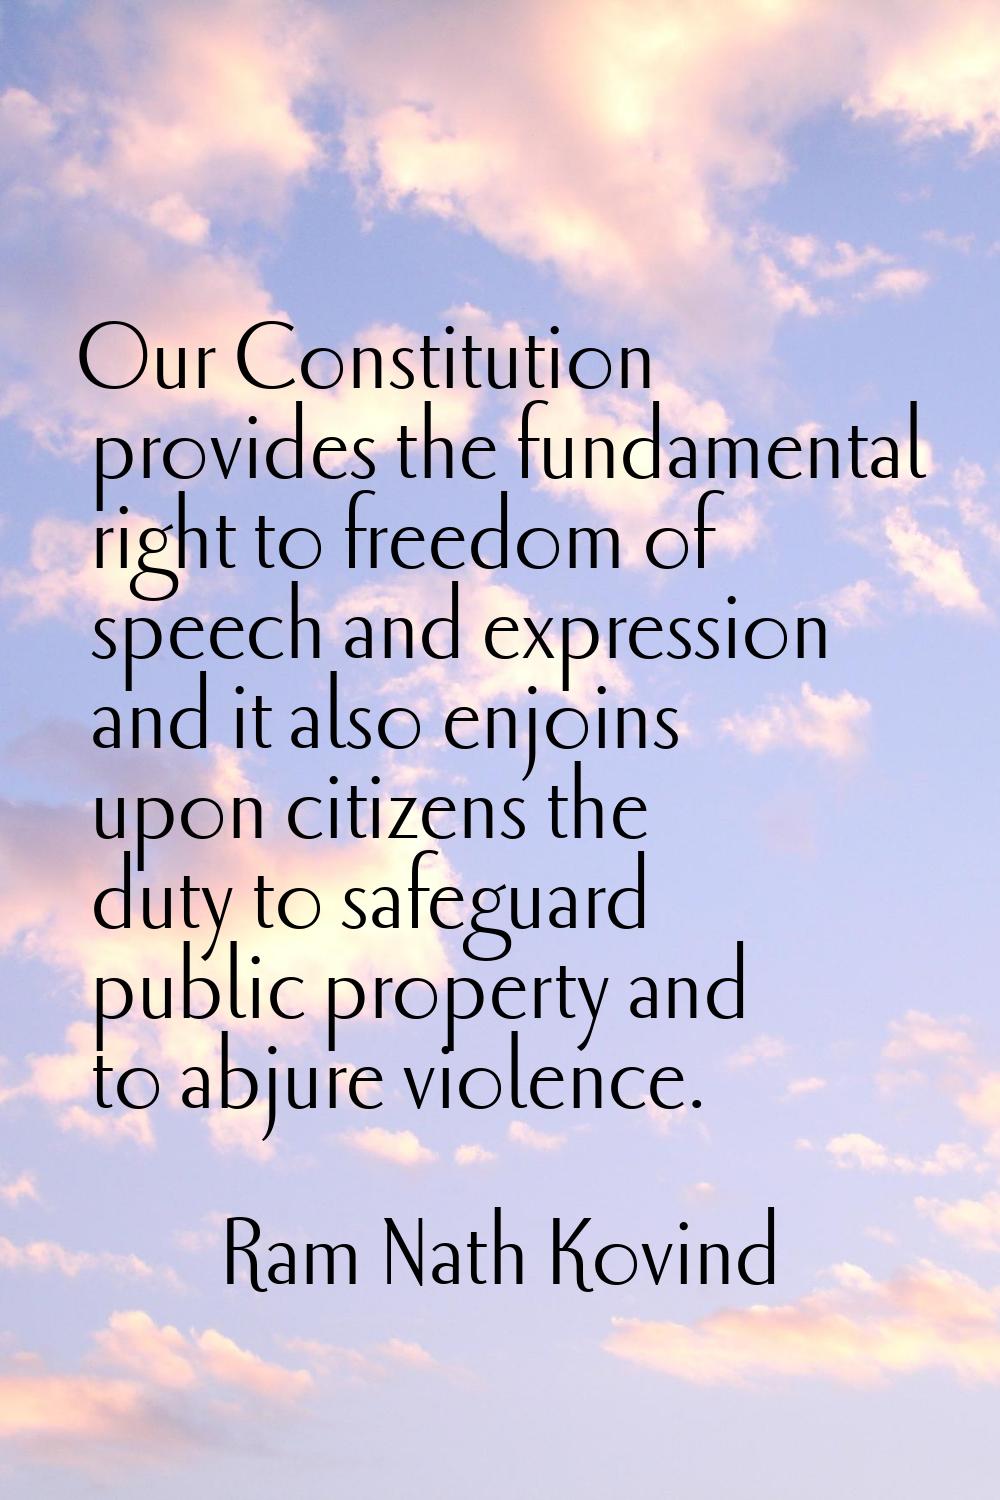 Our Constitution provides the fundamental right to freedom of speech and expression and it also enj